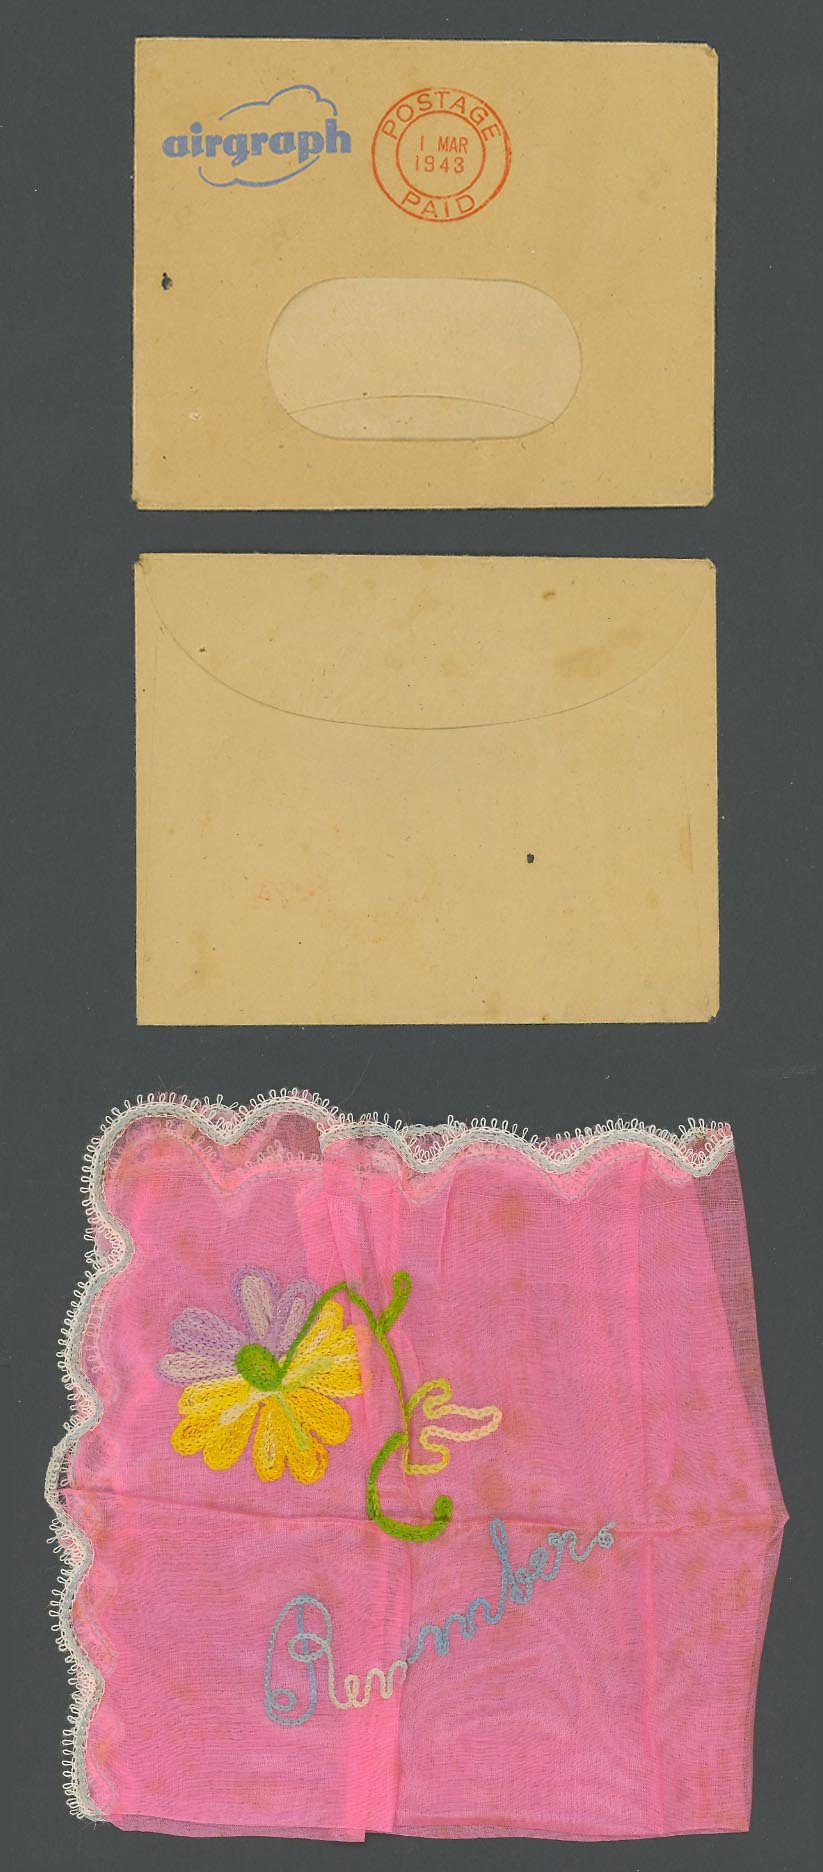 SILK Embroidered Handkerchief Flower & Remember 1943 Old airgraph Envelope Cover